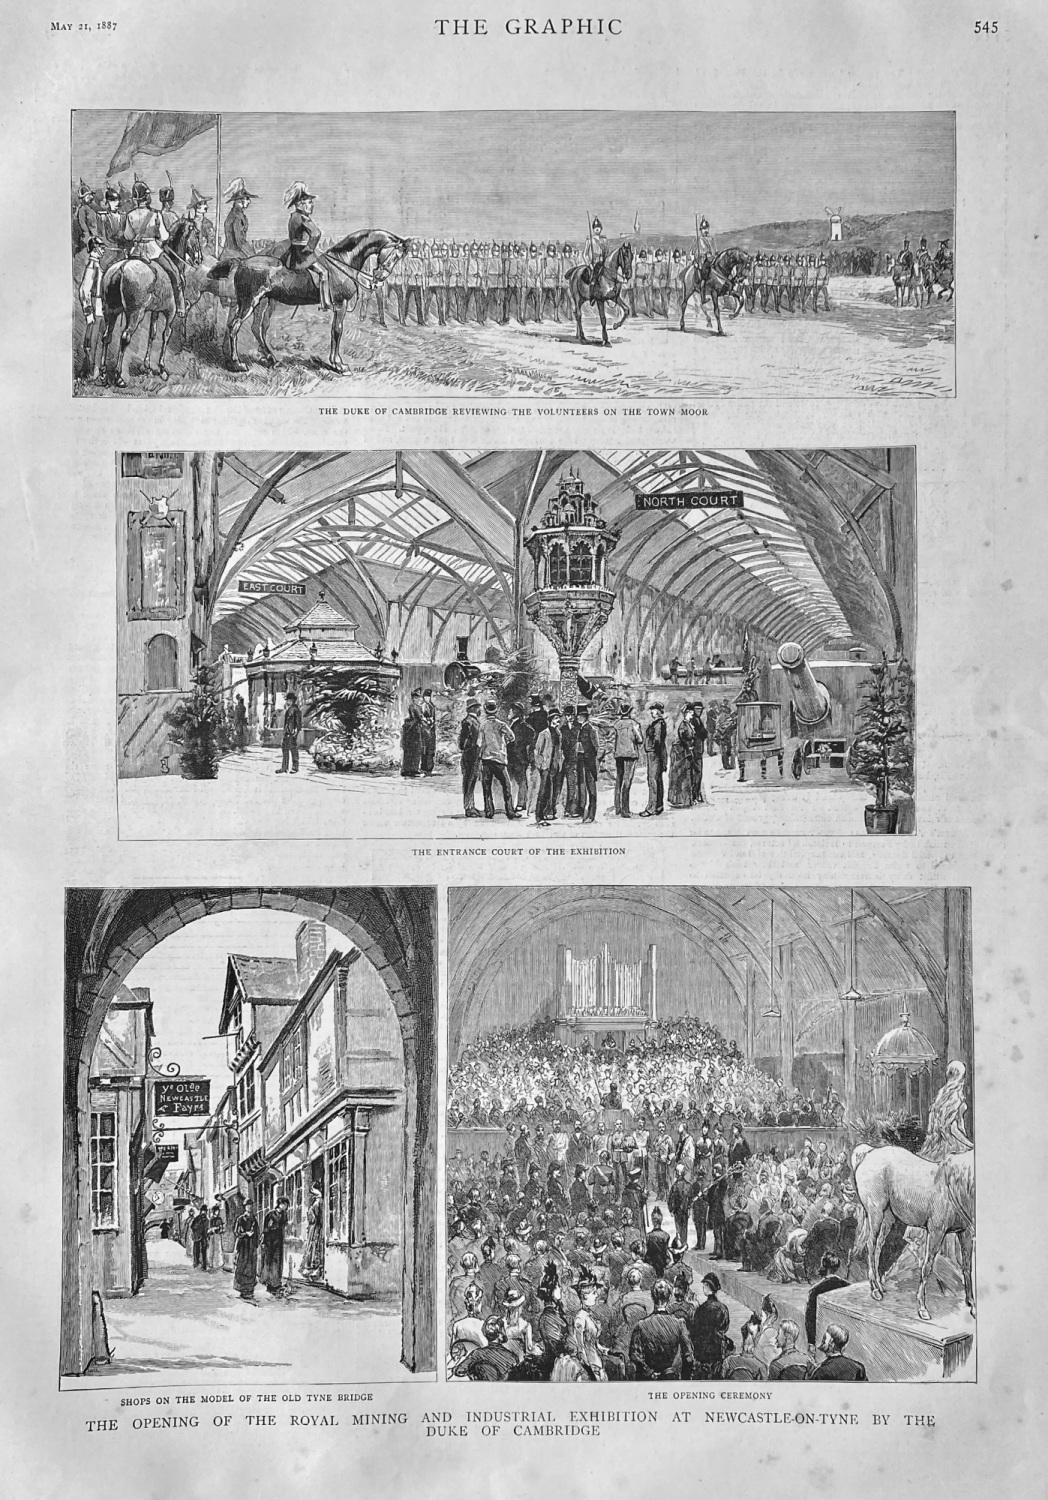 The Opening of the Royal Mining and Industrial Exhibition at Newcastle-on-T